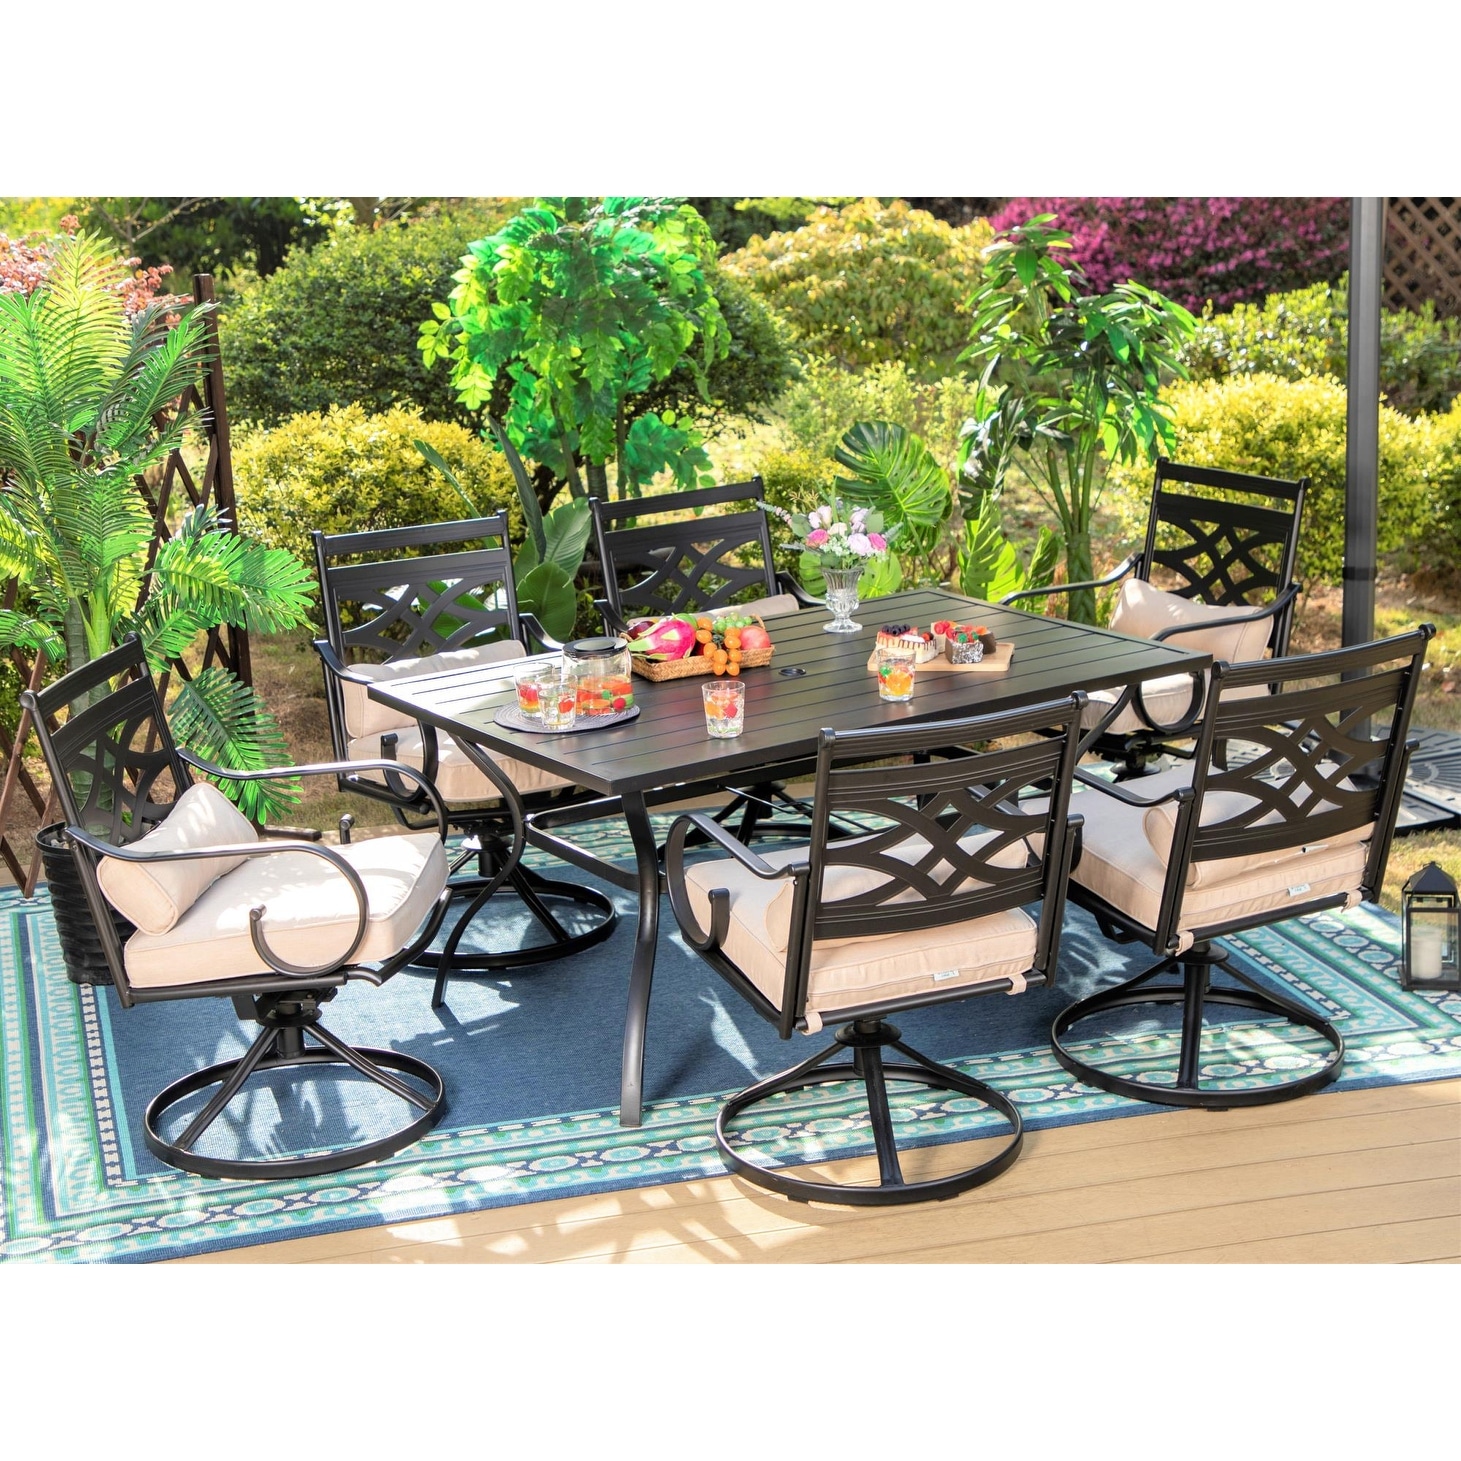 7-piece Outdoor Dining Set Steel Rectangle Table and Elegant Cast Iron Pattern Dining Chairs